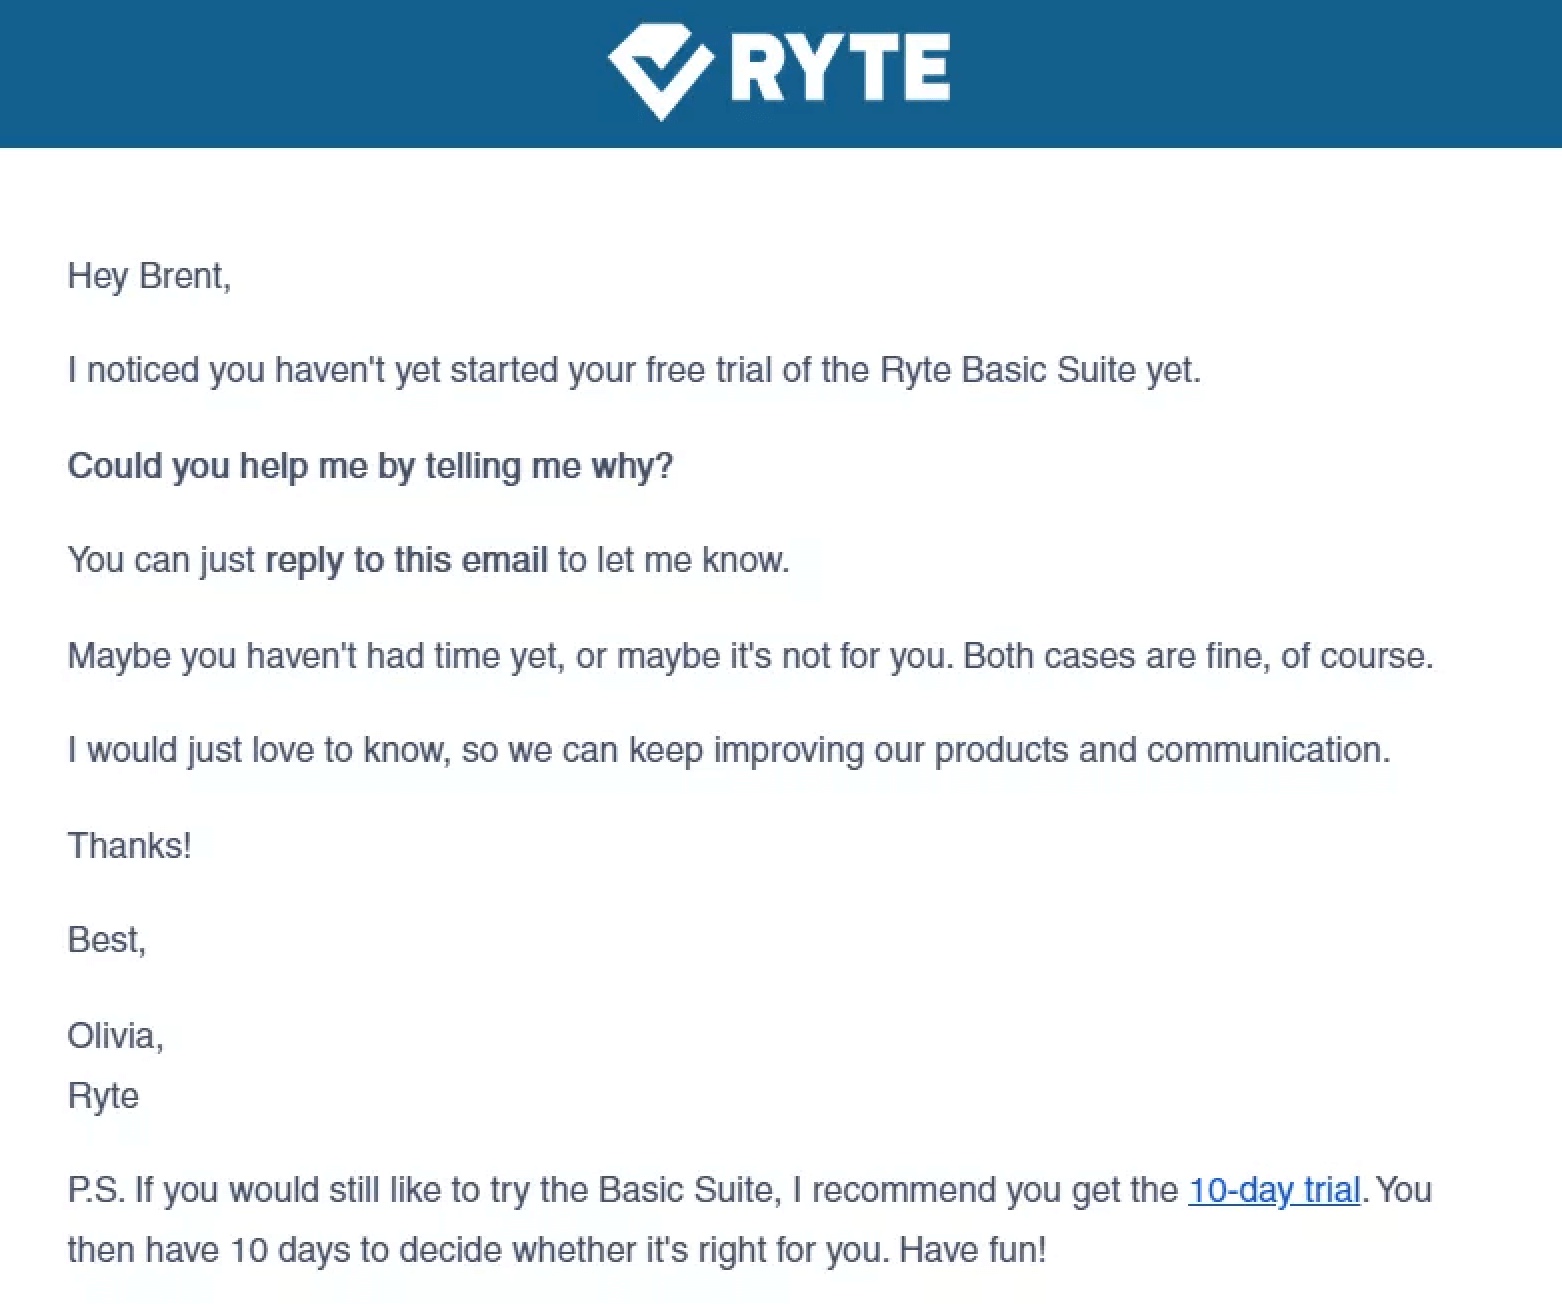 SaaS Re-engagement Emails: Screenshot of Ryte's email